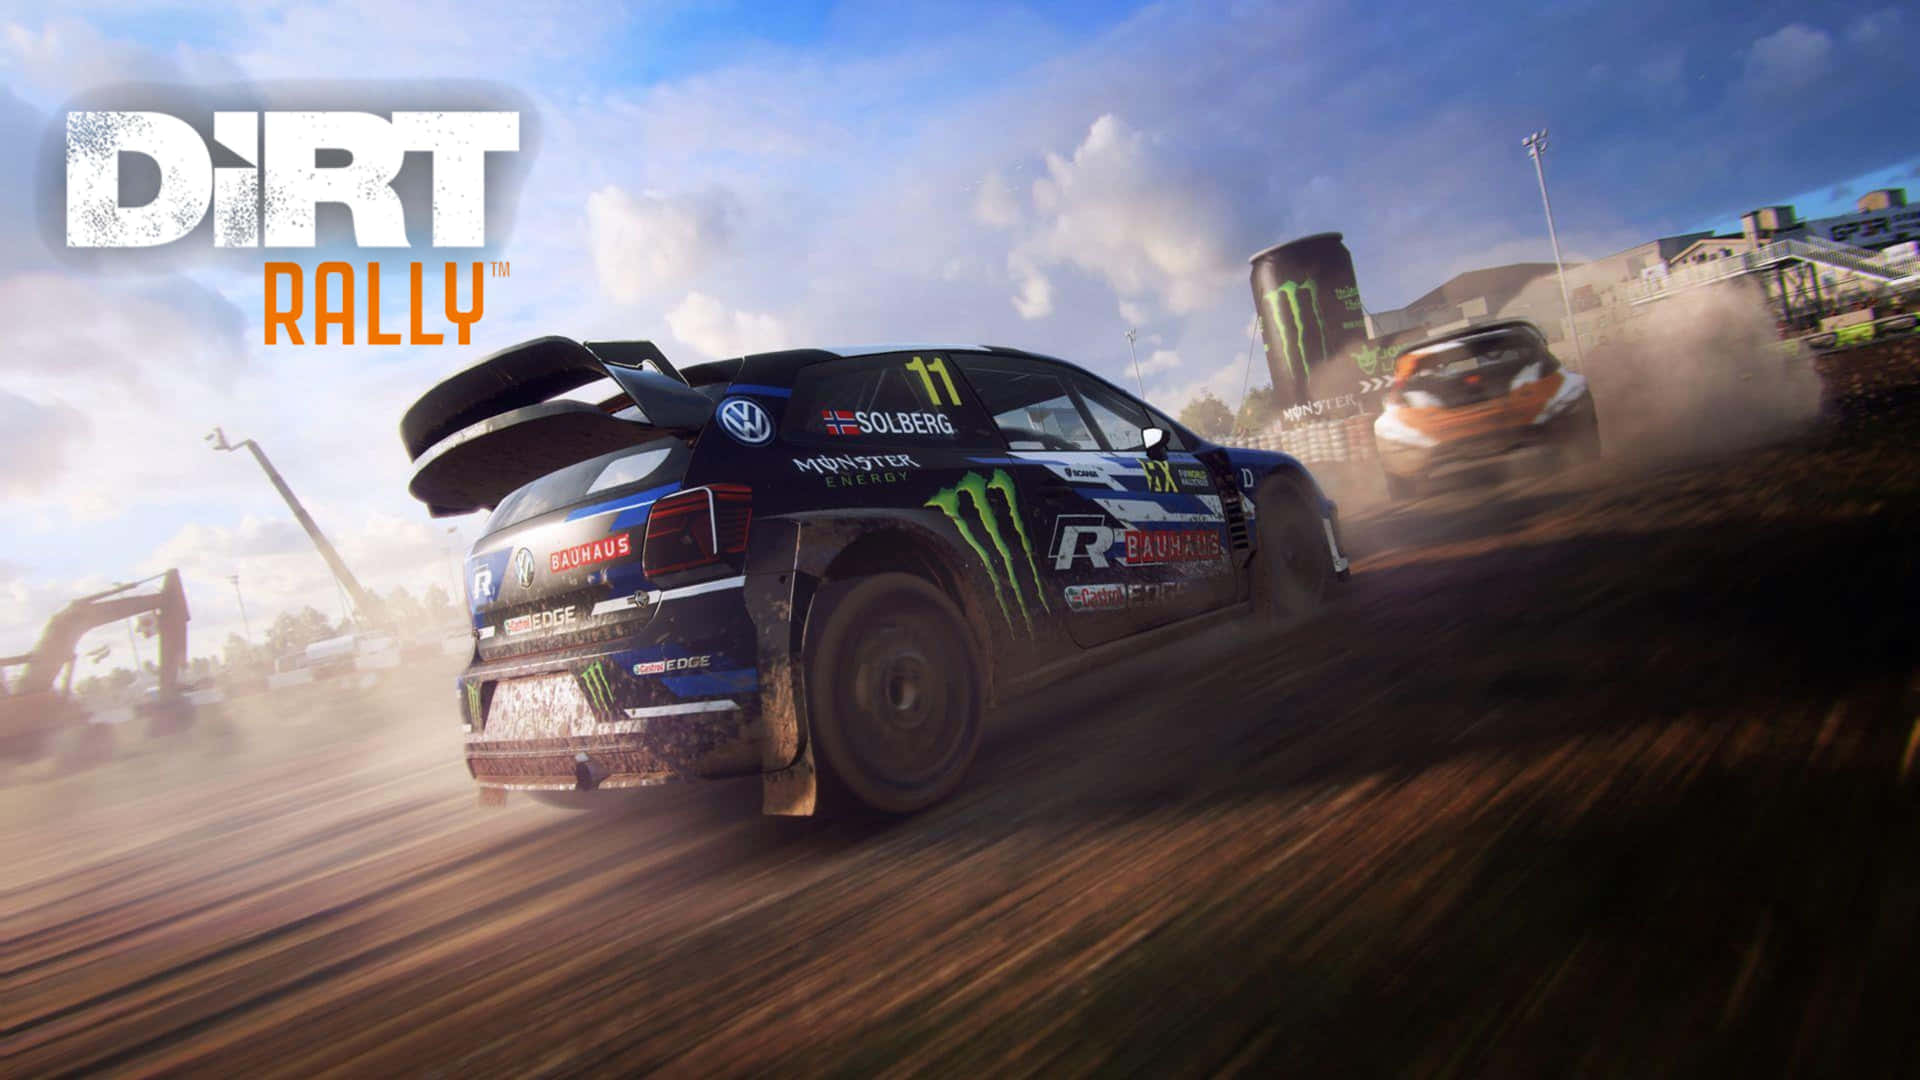 Get your heart pumping with the 4K Dirt Rally!